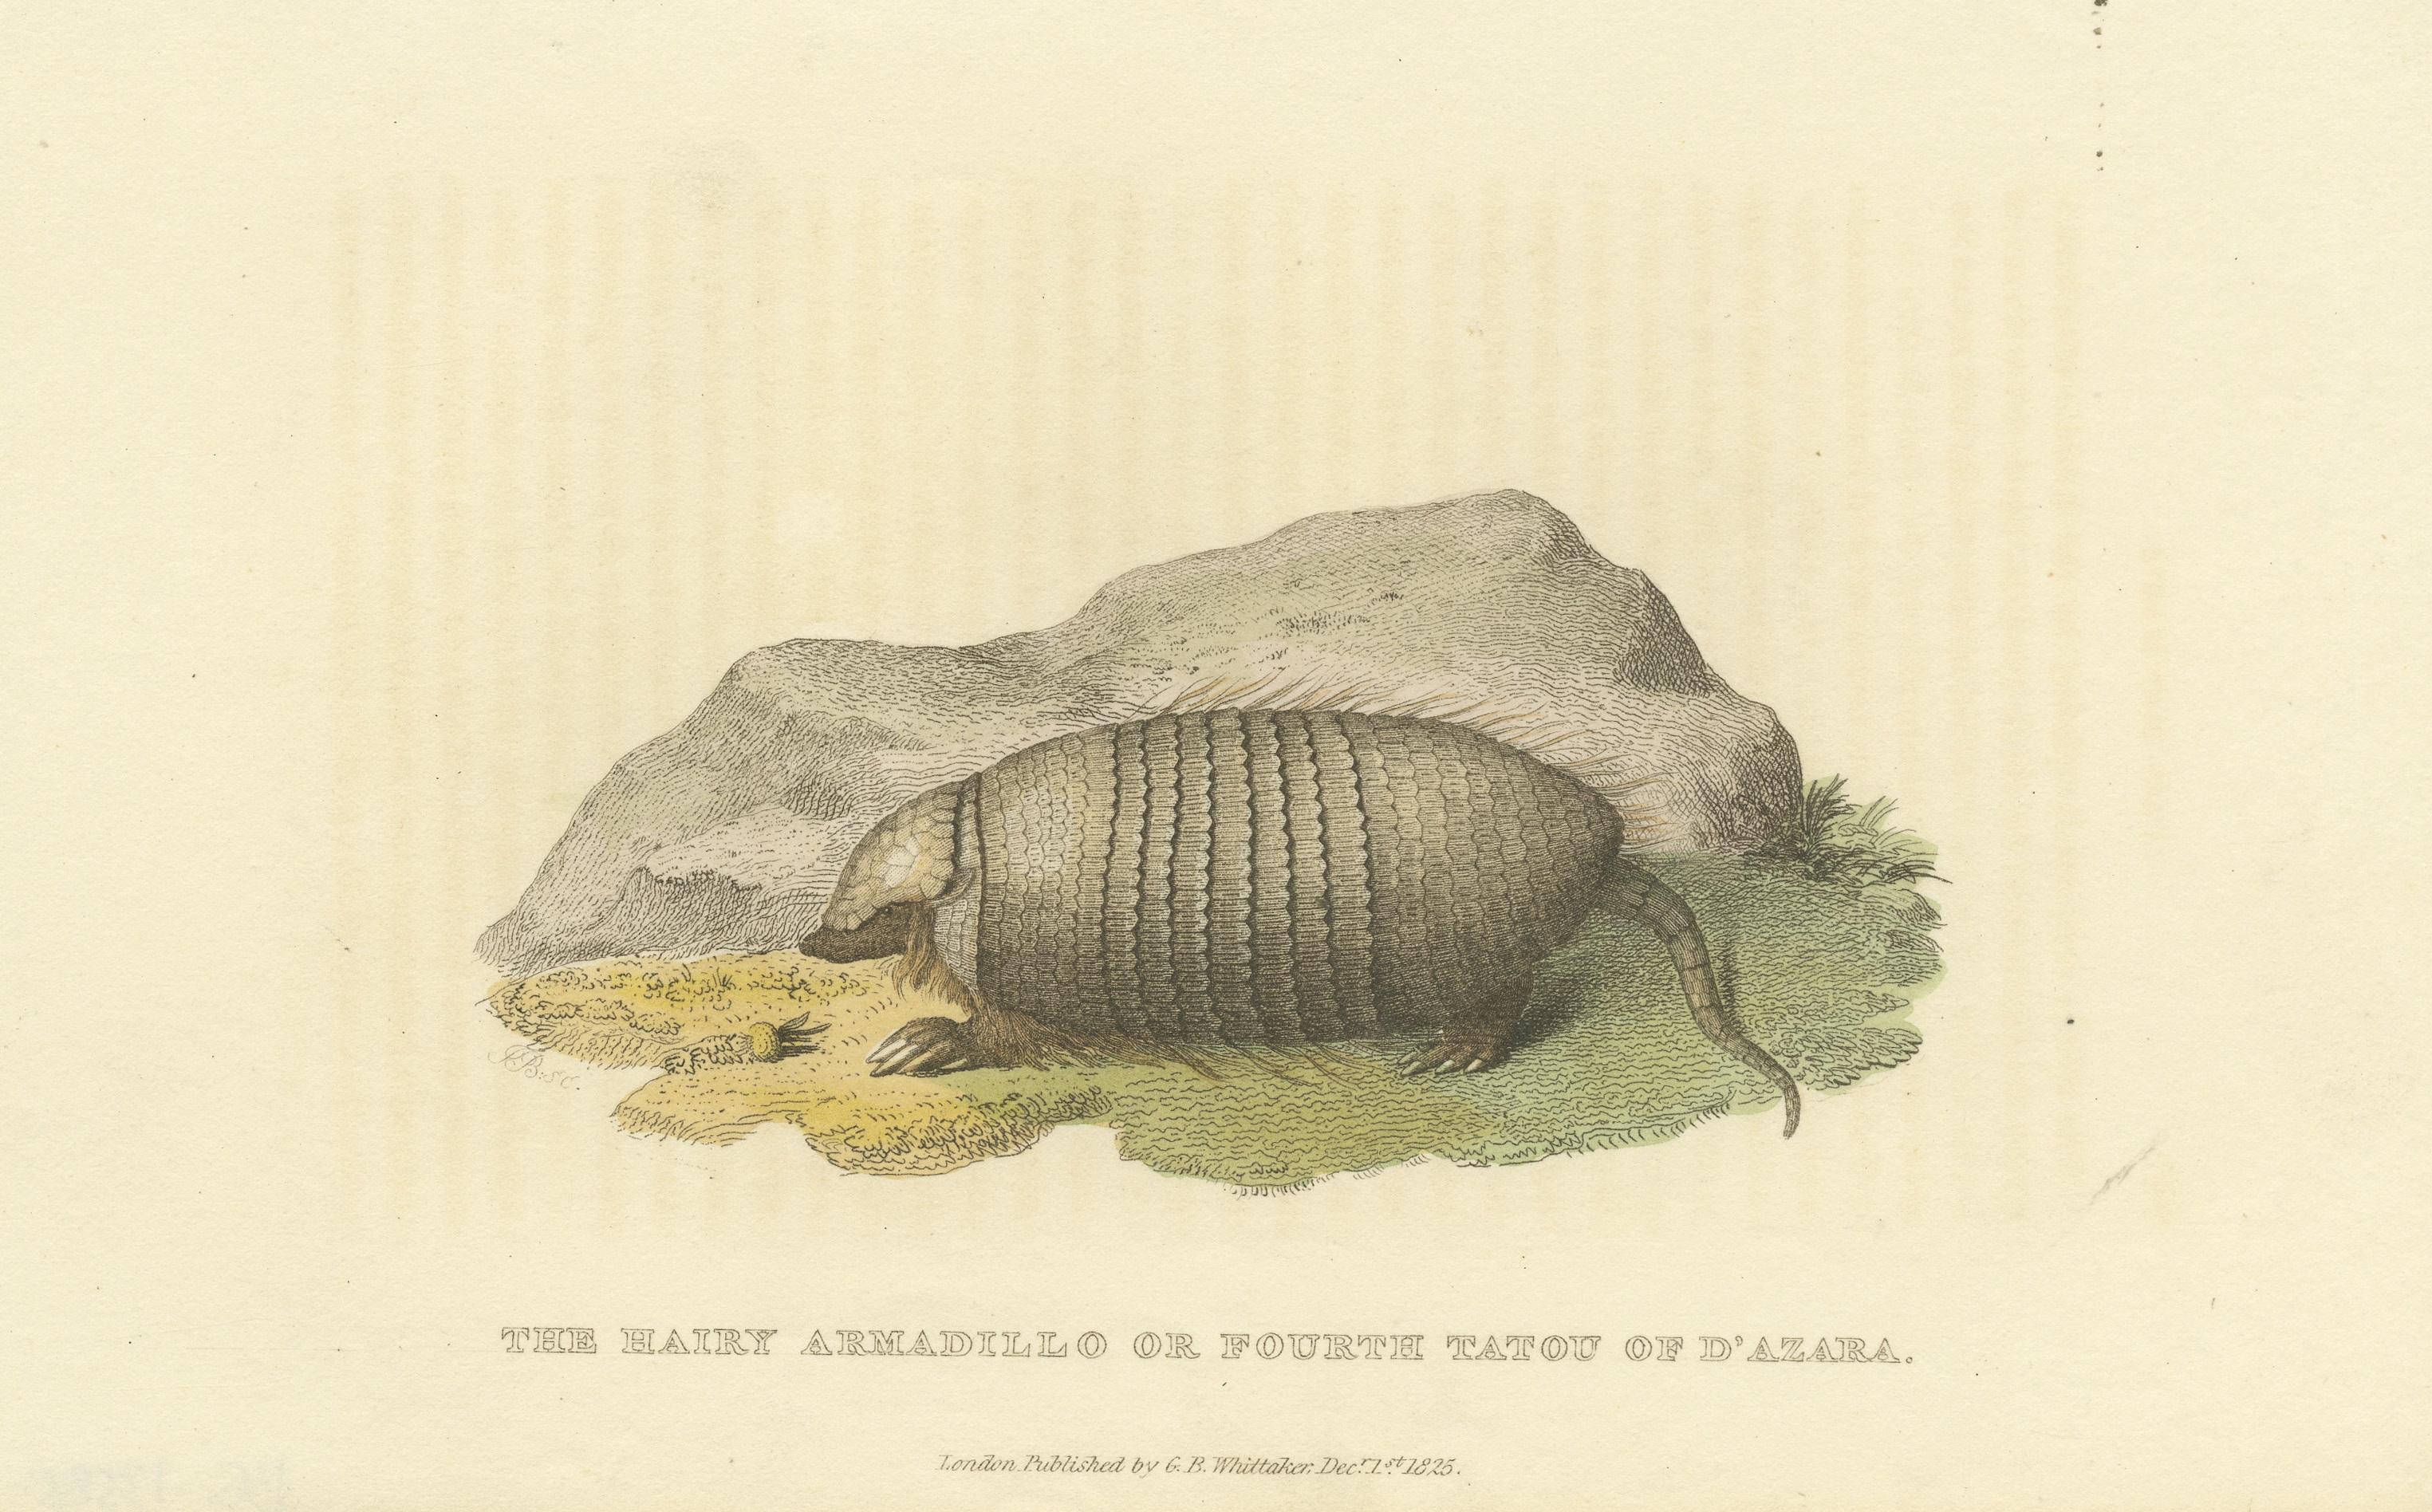 19th Century An Original 1825 Illustration of the Large Hairy Armadillo by G.B. Whittaker For Sale